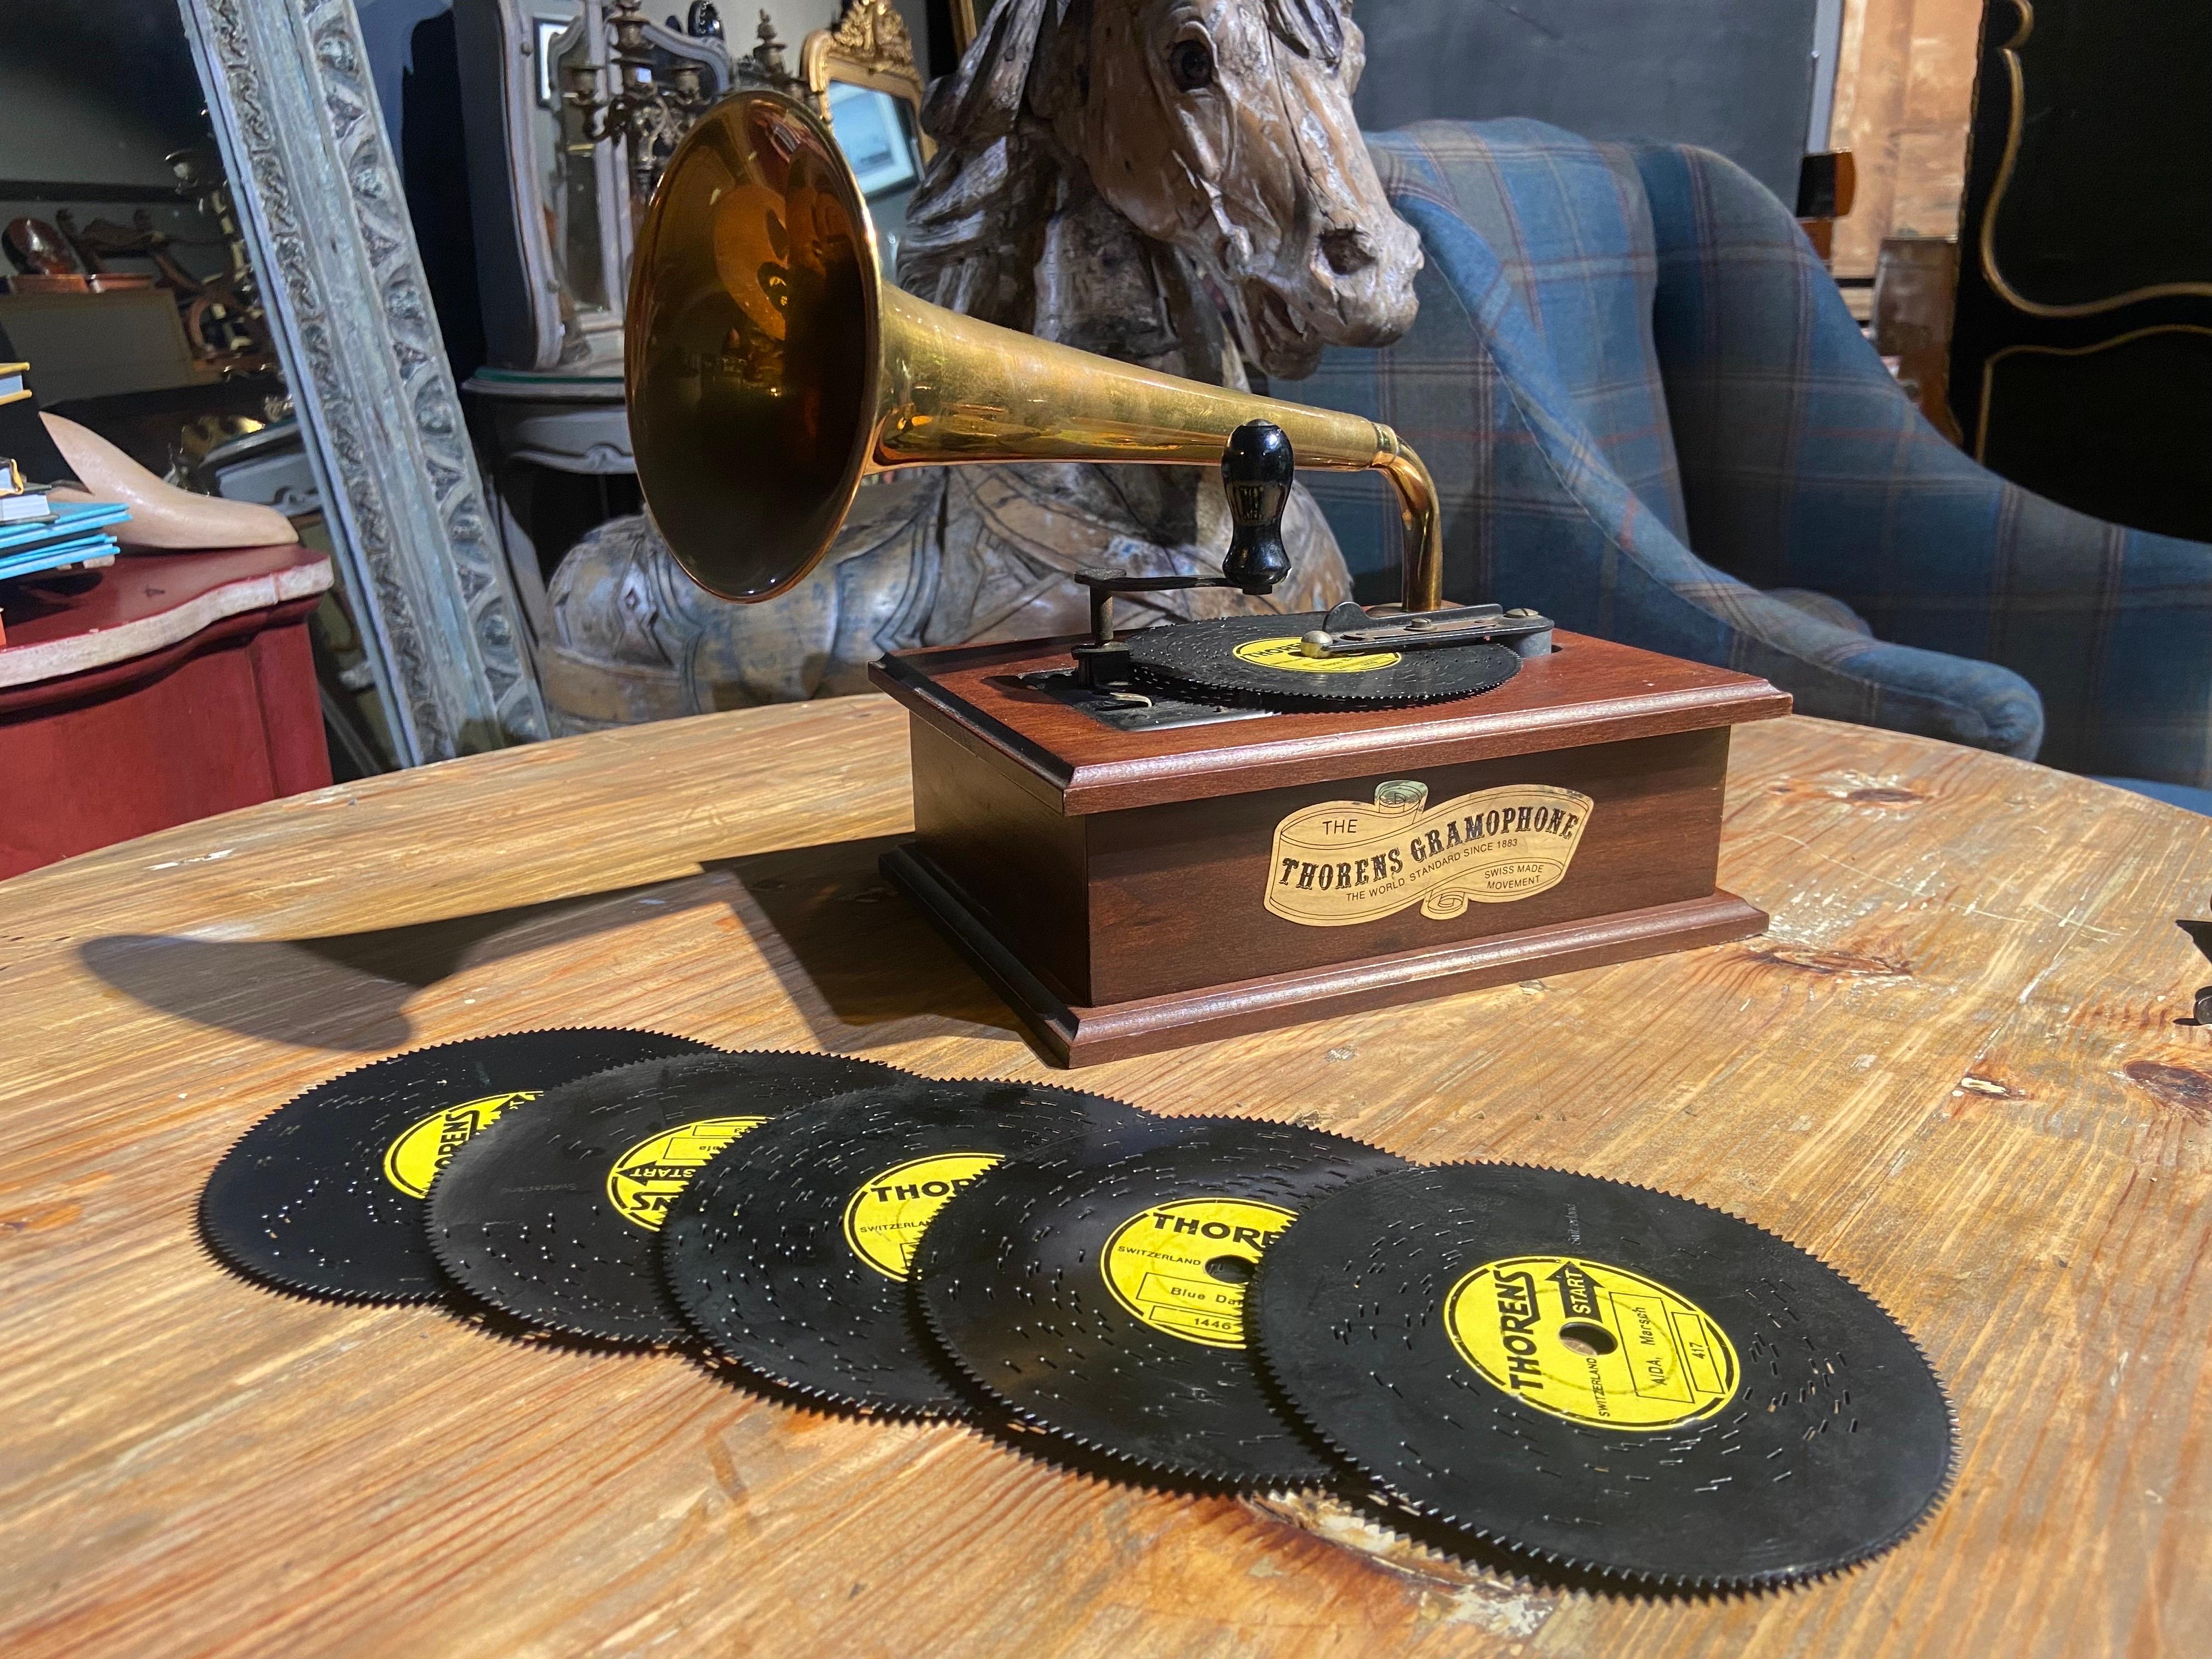 Here we present a vintage Thorens Gramophone AD-30 disc player/ music box, Thorens model #755, circa 1975. The nostalgic solid wood cabinet was hand crafted by Thorens and features a mahogany finish, as well as a removable solid brass horn. The back